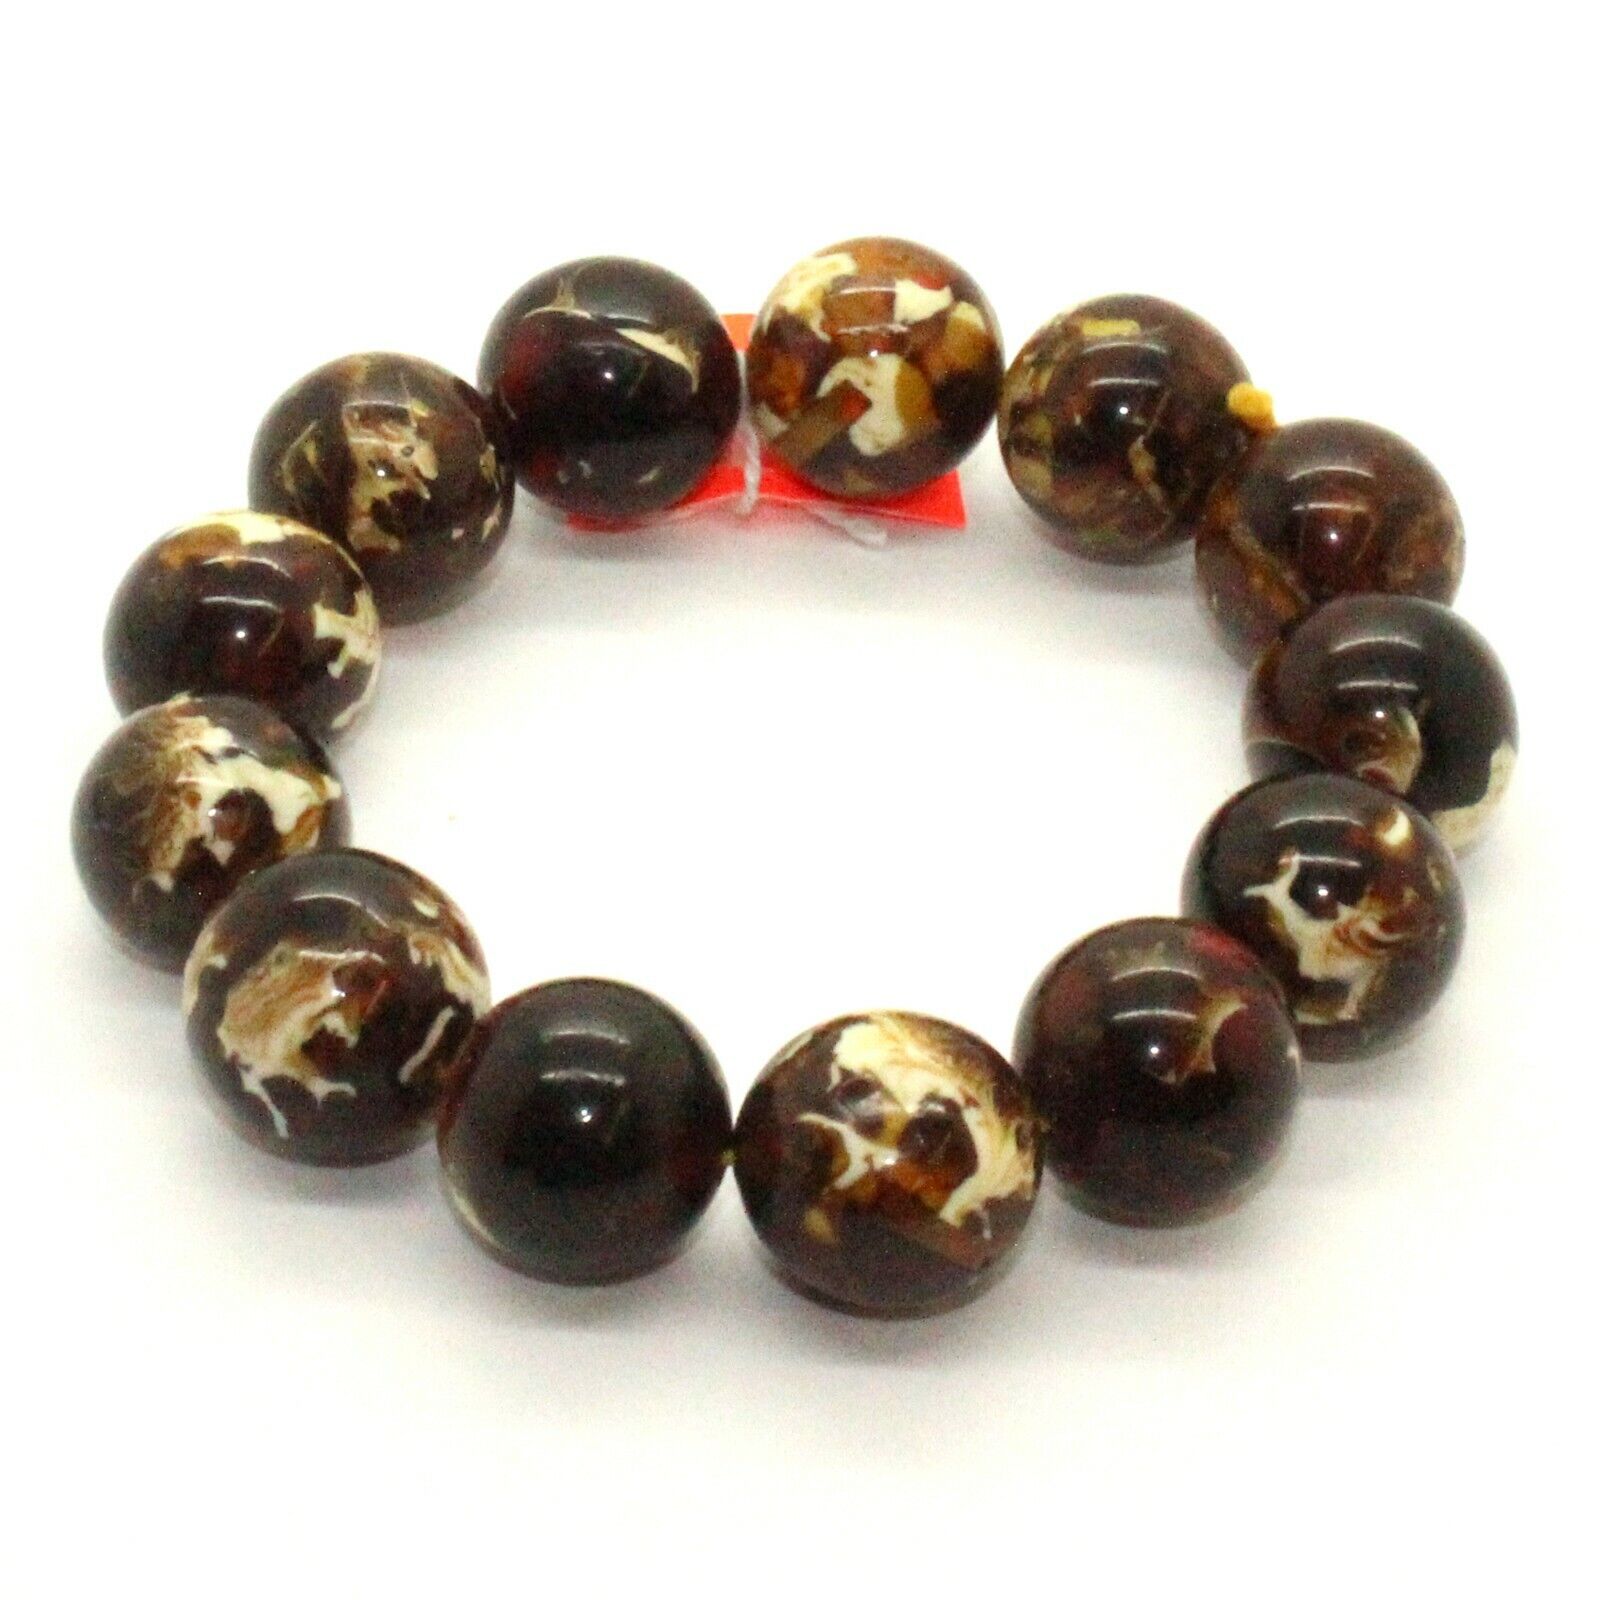 Natural Solid Brown White Mix Amber Beads Hand Rosary Praying Bracelet ws242